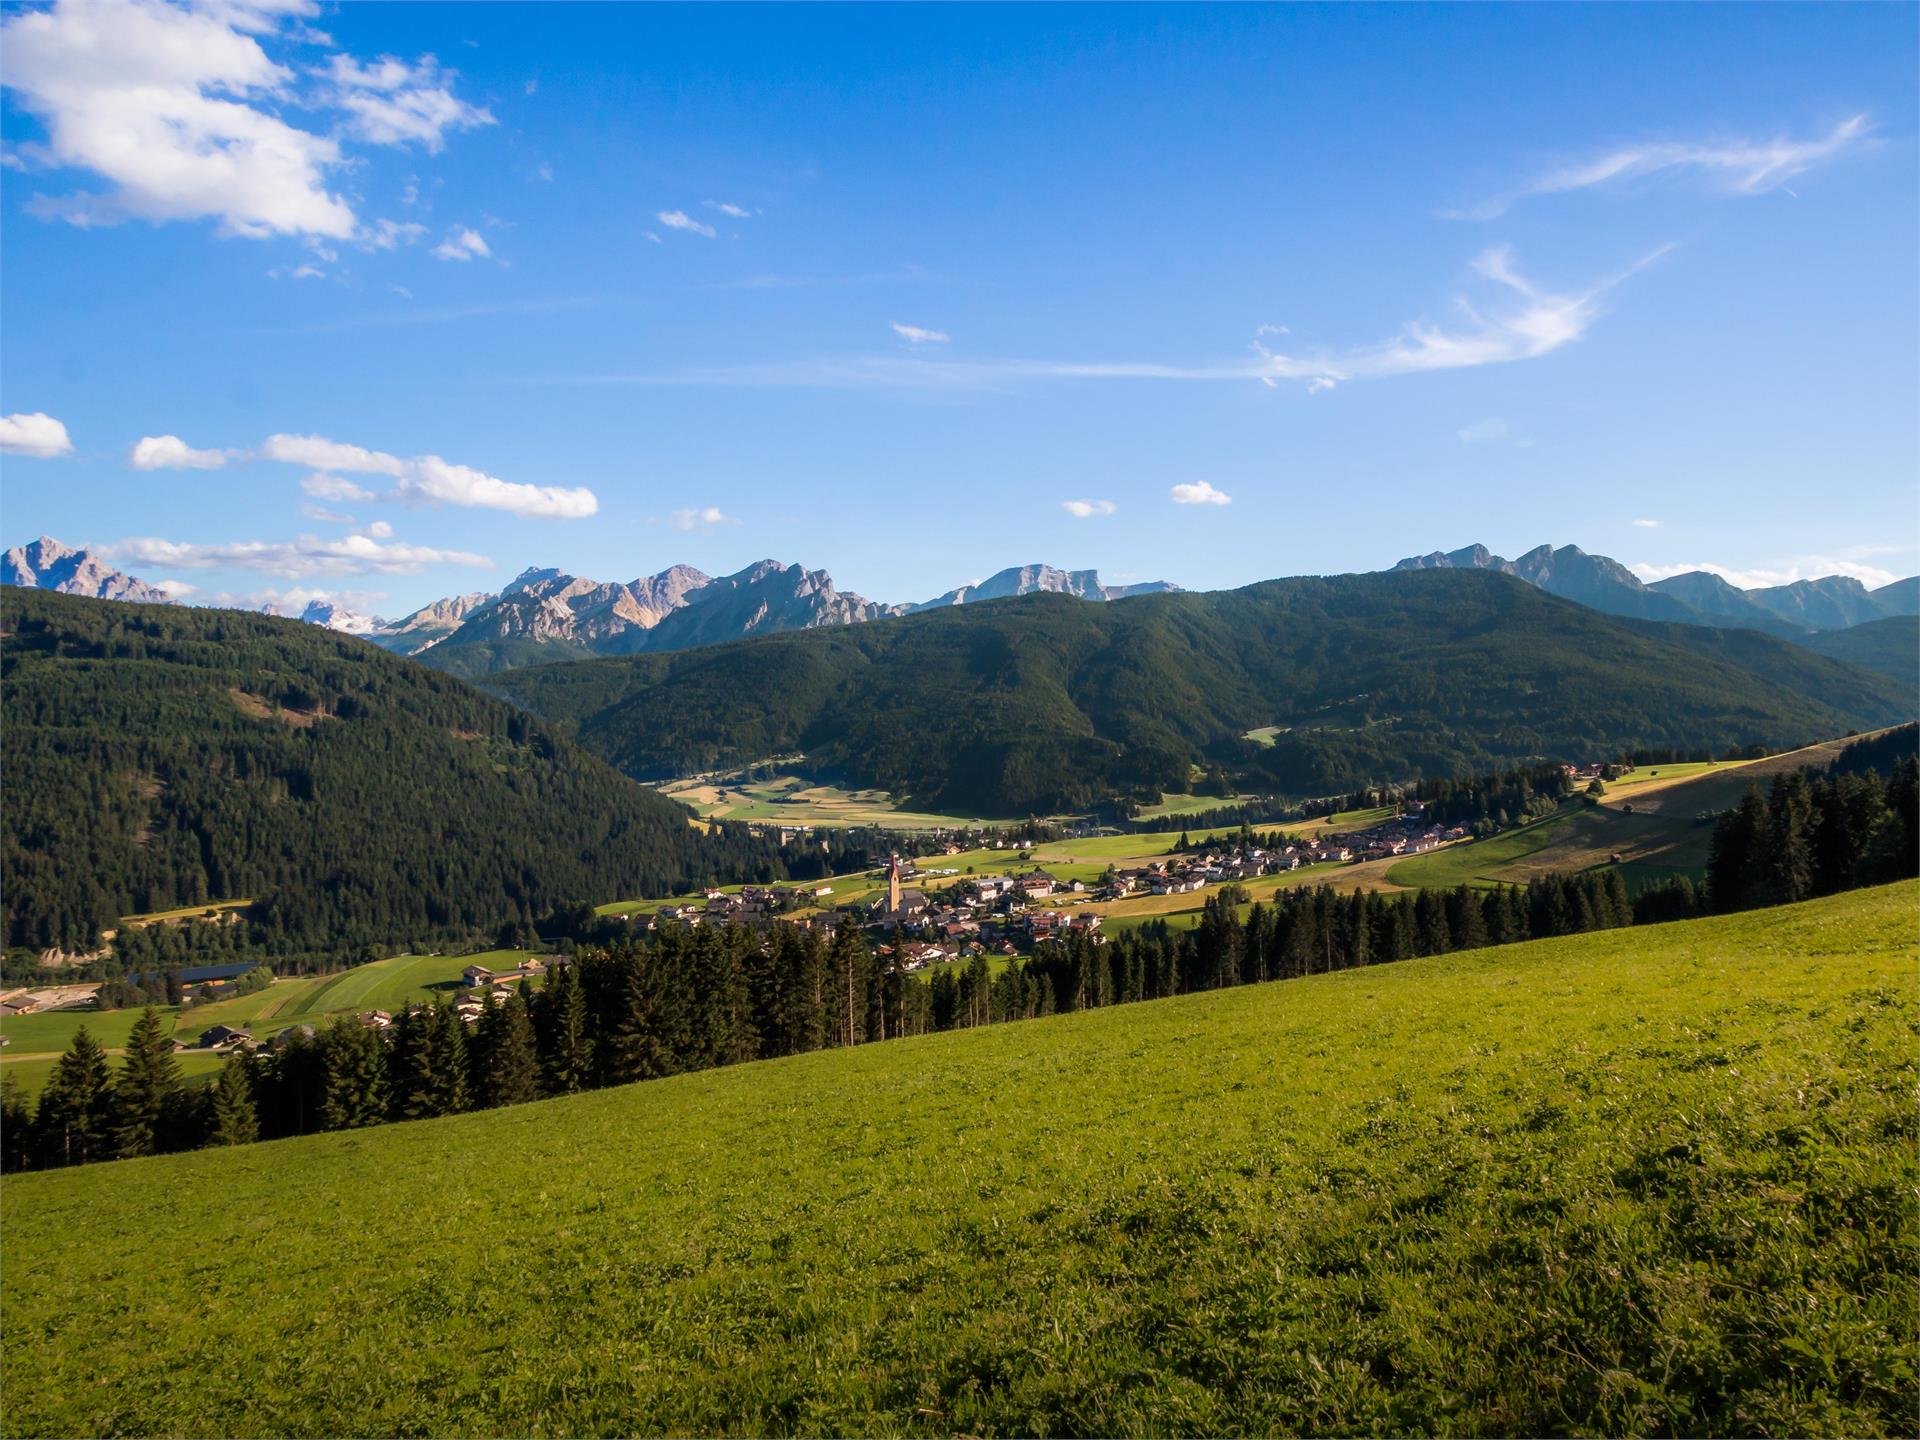 Hiking tour on the "Lottersteig"